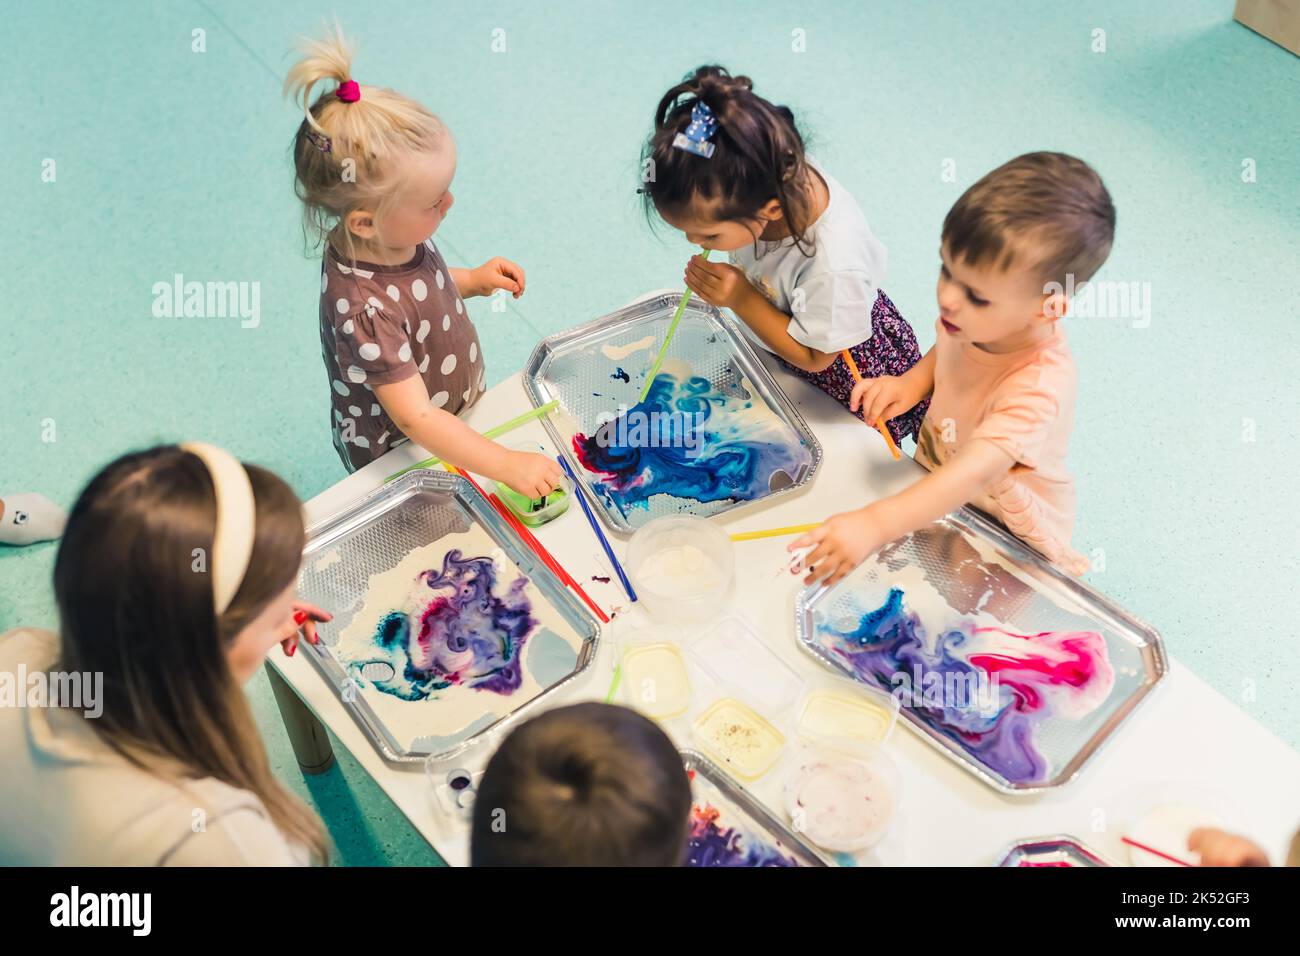 kids standing at the table full of watercolors and trying to paint with their teacher, nursery kids' concept. High quality photo Stock Photo